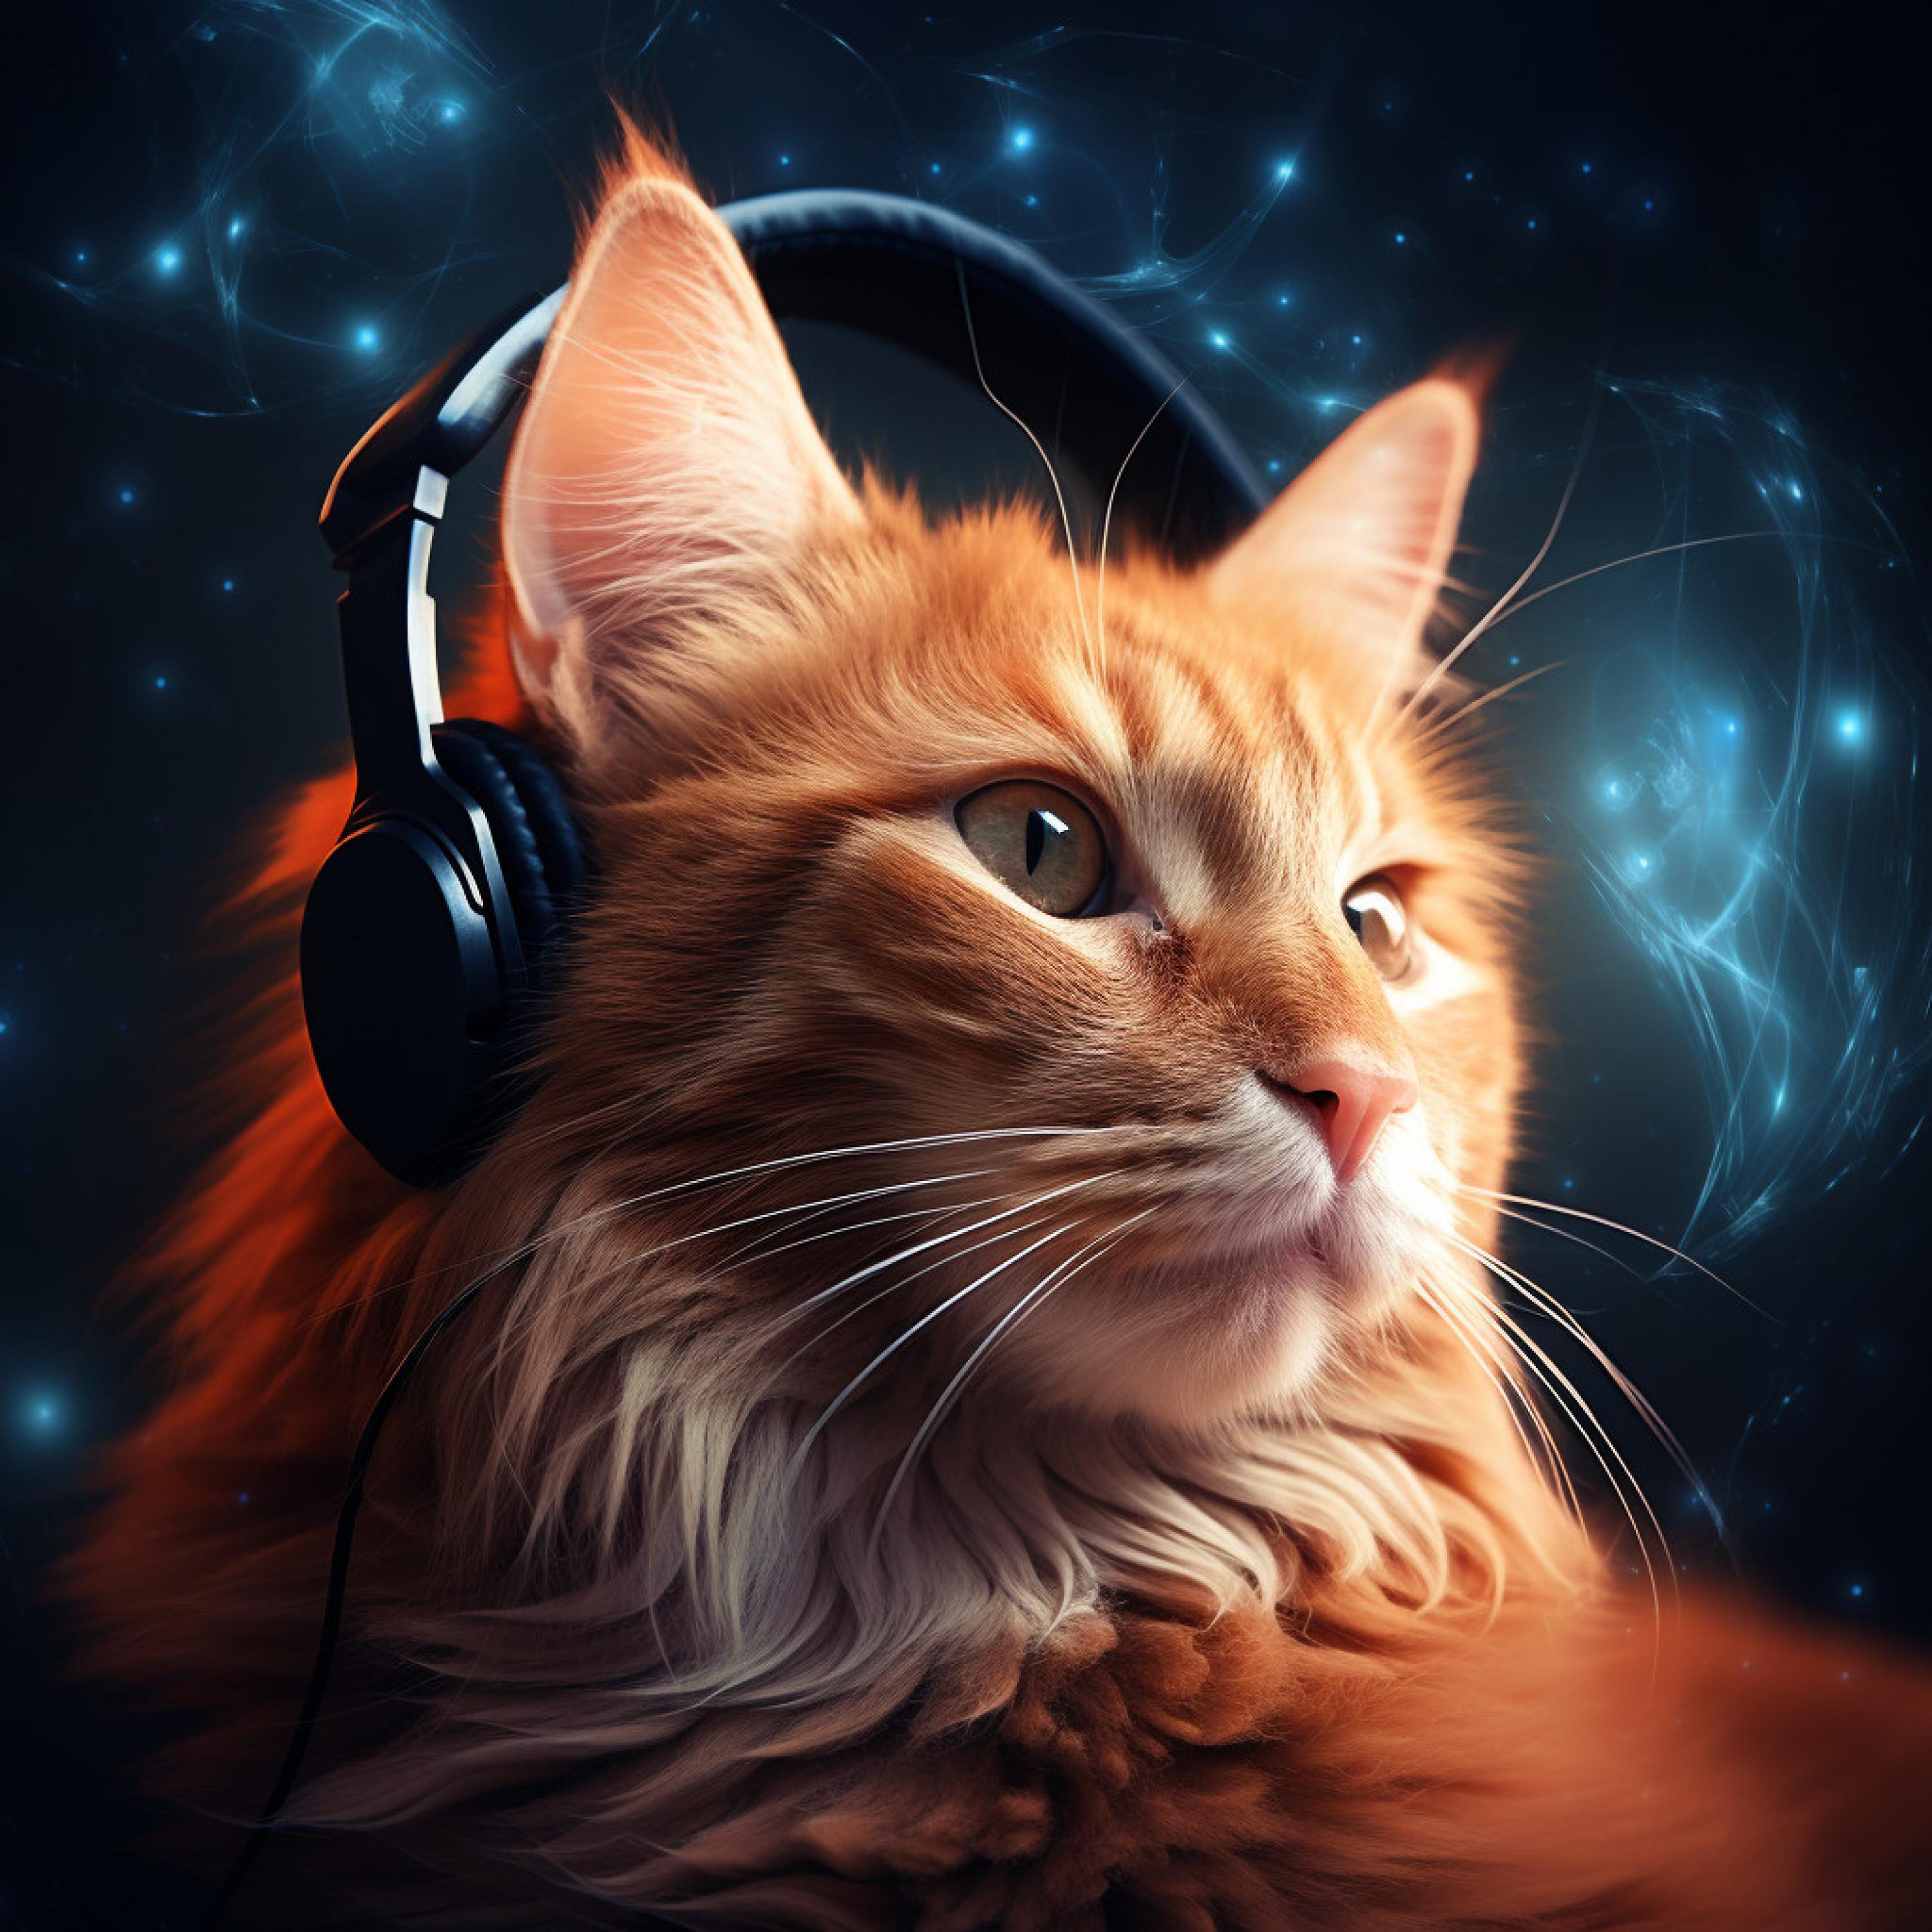 Calm Music for Cats - Purr's Soothing Harmony